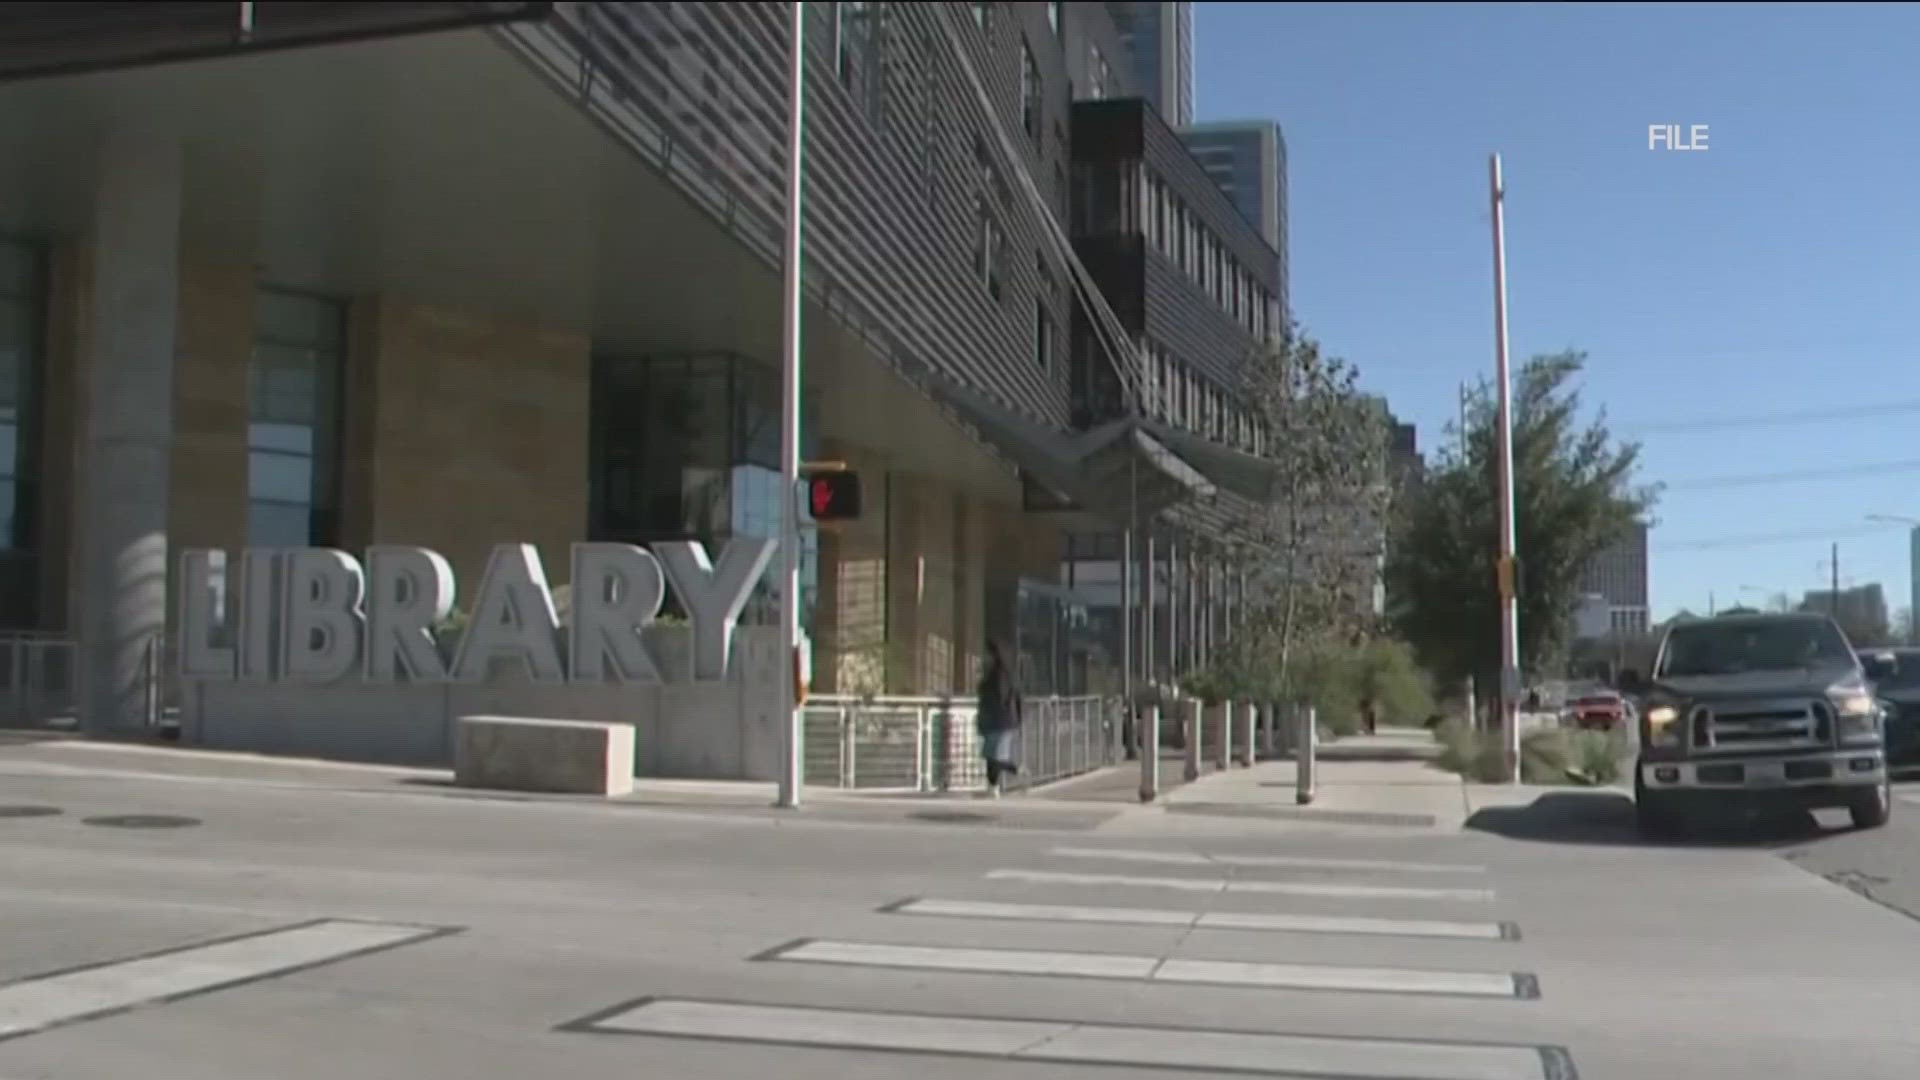 The Austin City Council is making moves to expand the city's library system.